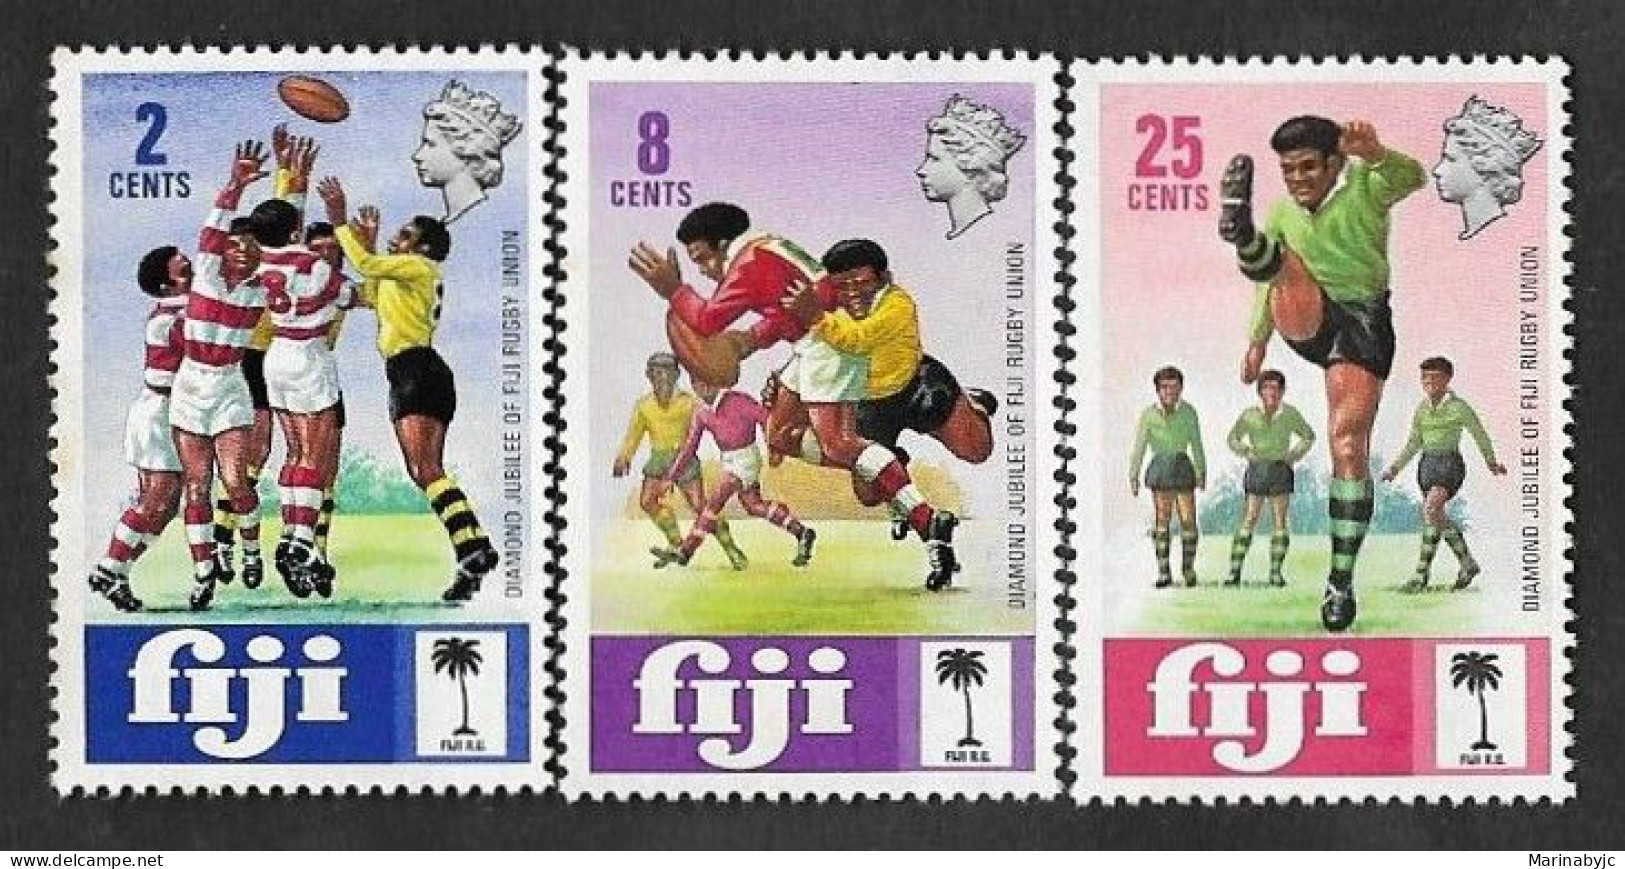 SD)1973 FIJI  FROM THE SPORT SERIES, 50TH ANNIVERSARY OF THE NATIONAL RUGBY UNION, 3 MINT STAMPS - Fiji (1970-...)